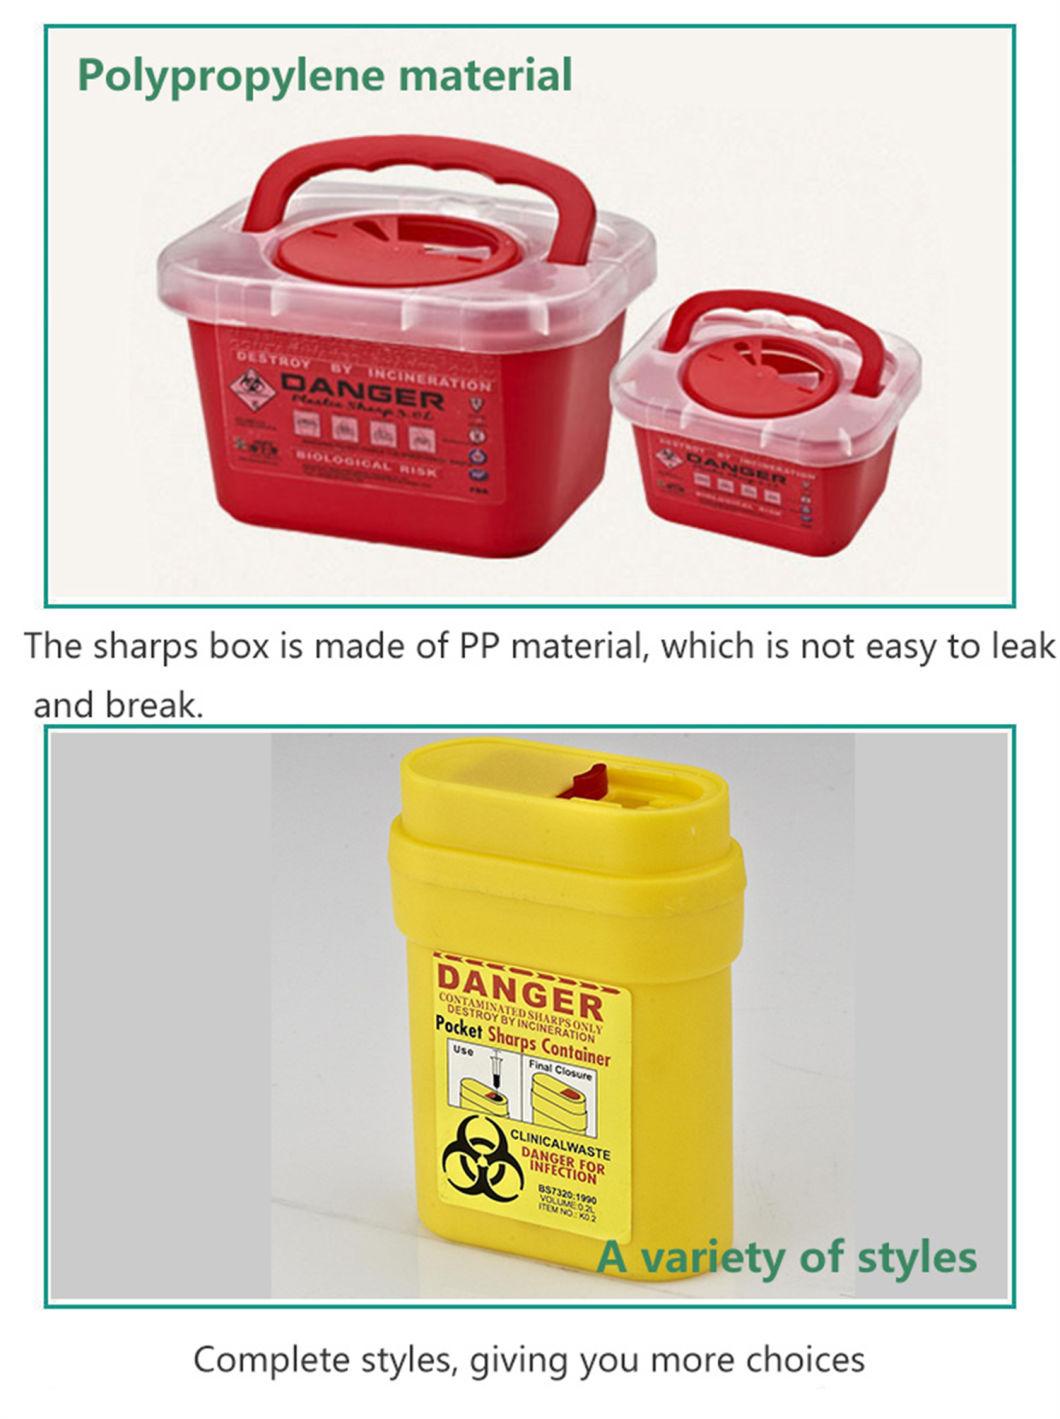 Medicaldisposable Plastic Sharps Container for Needle or Syringe